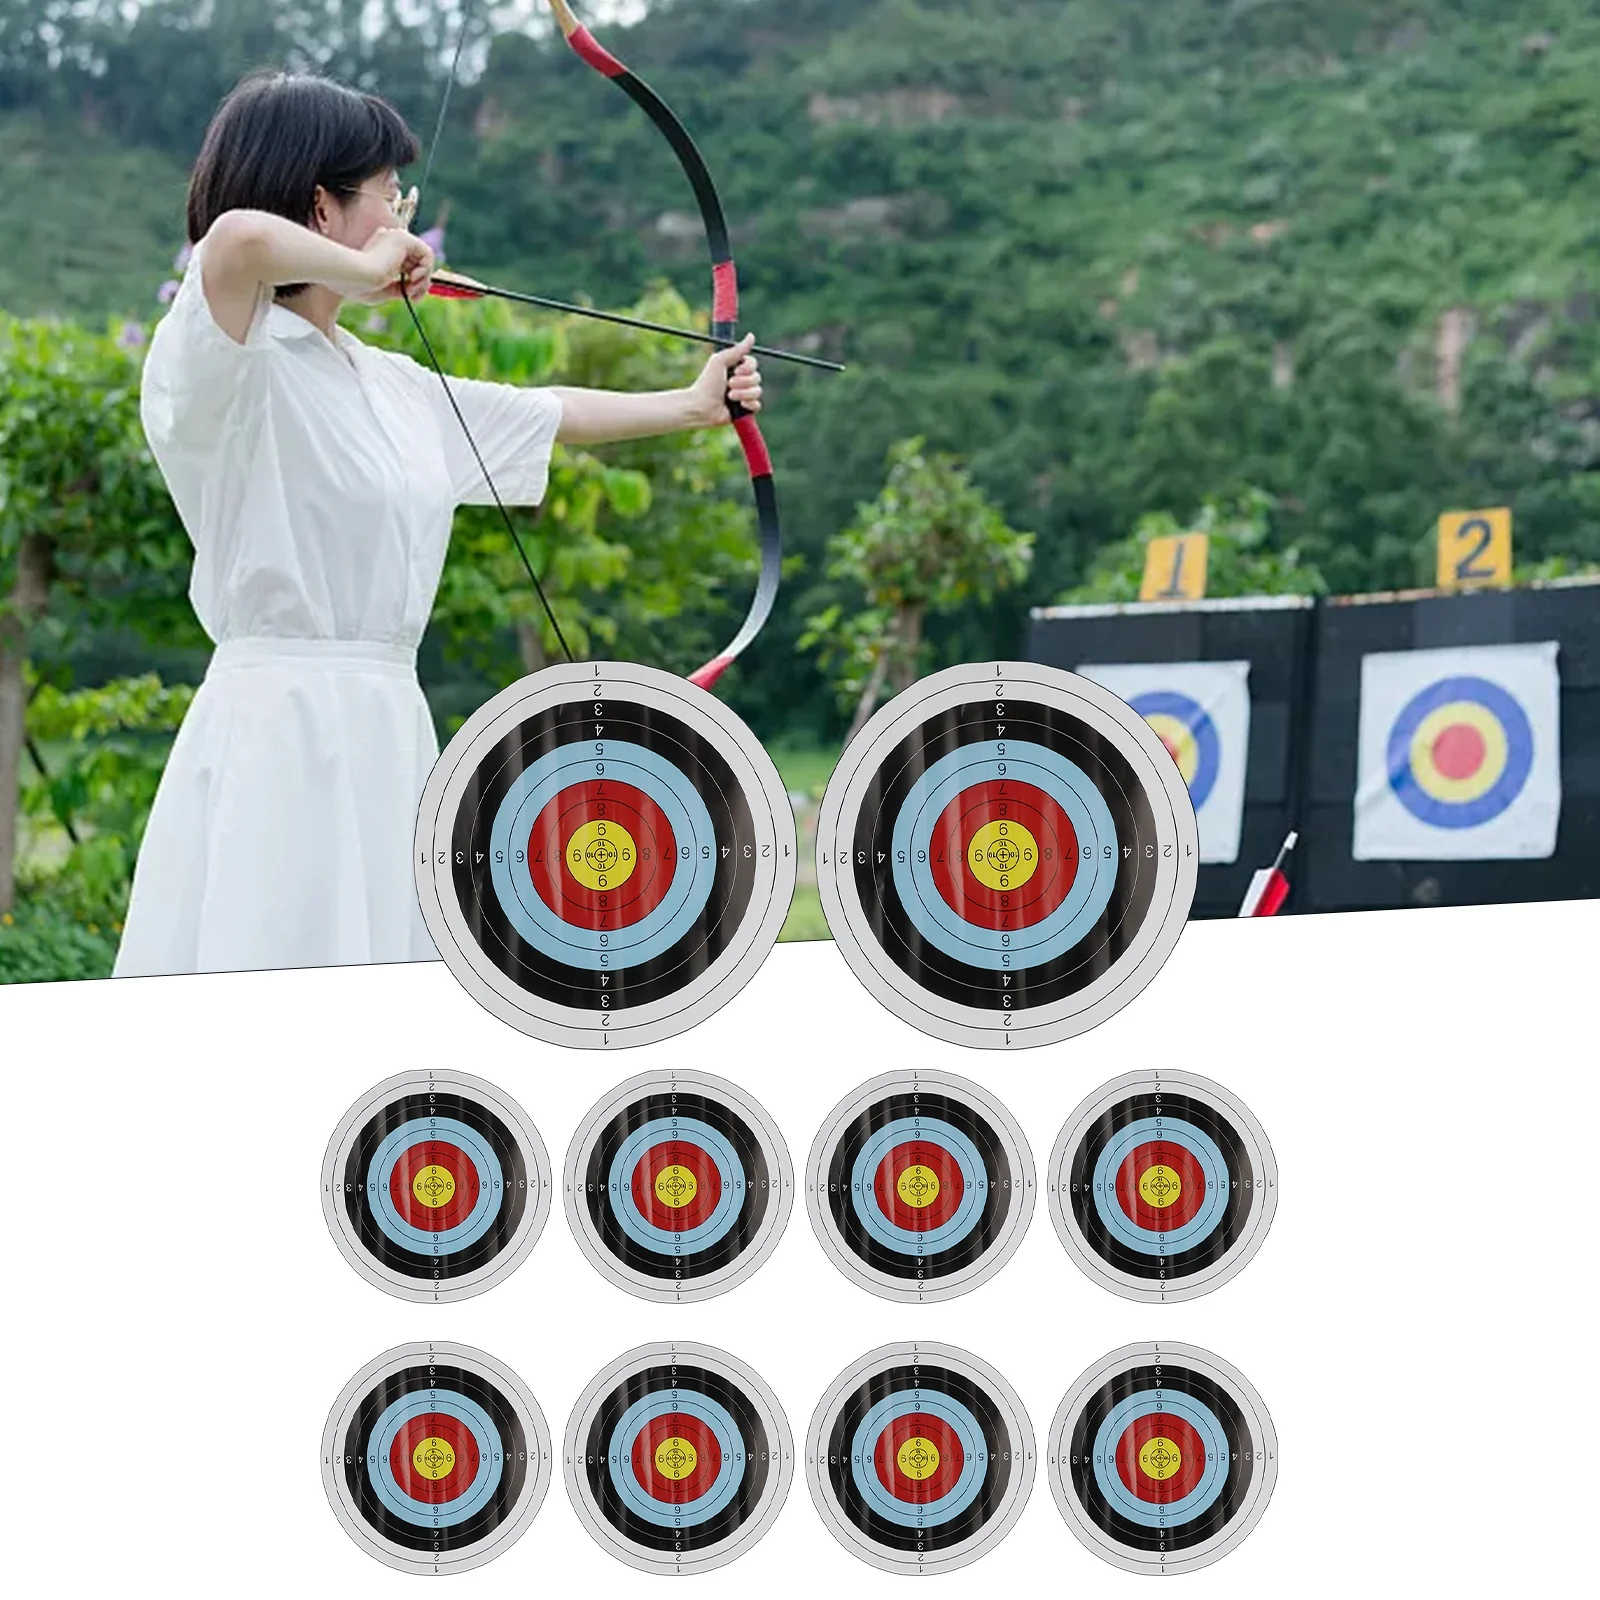 

Set Archery Paper Target Archery Paper Targets Target Bow Face For Arrow High-strength Adhesive Len Kit Outdoor Paper Practice